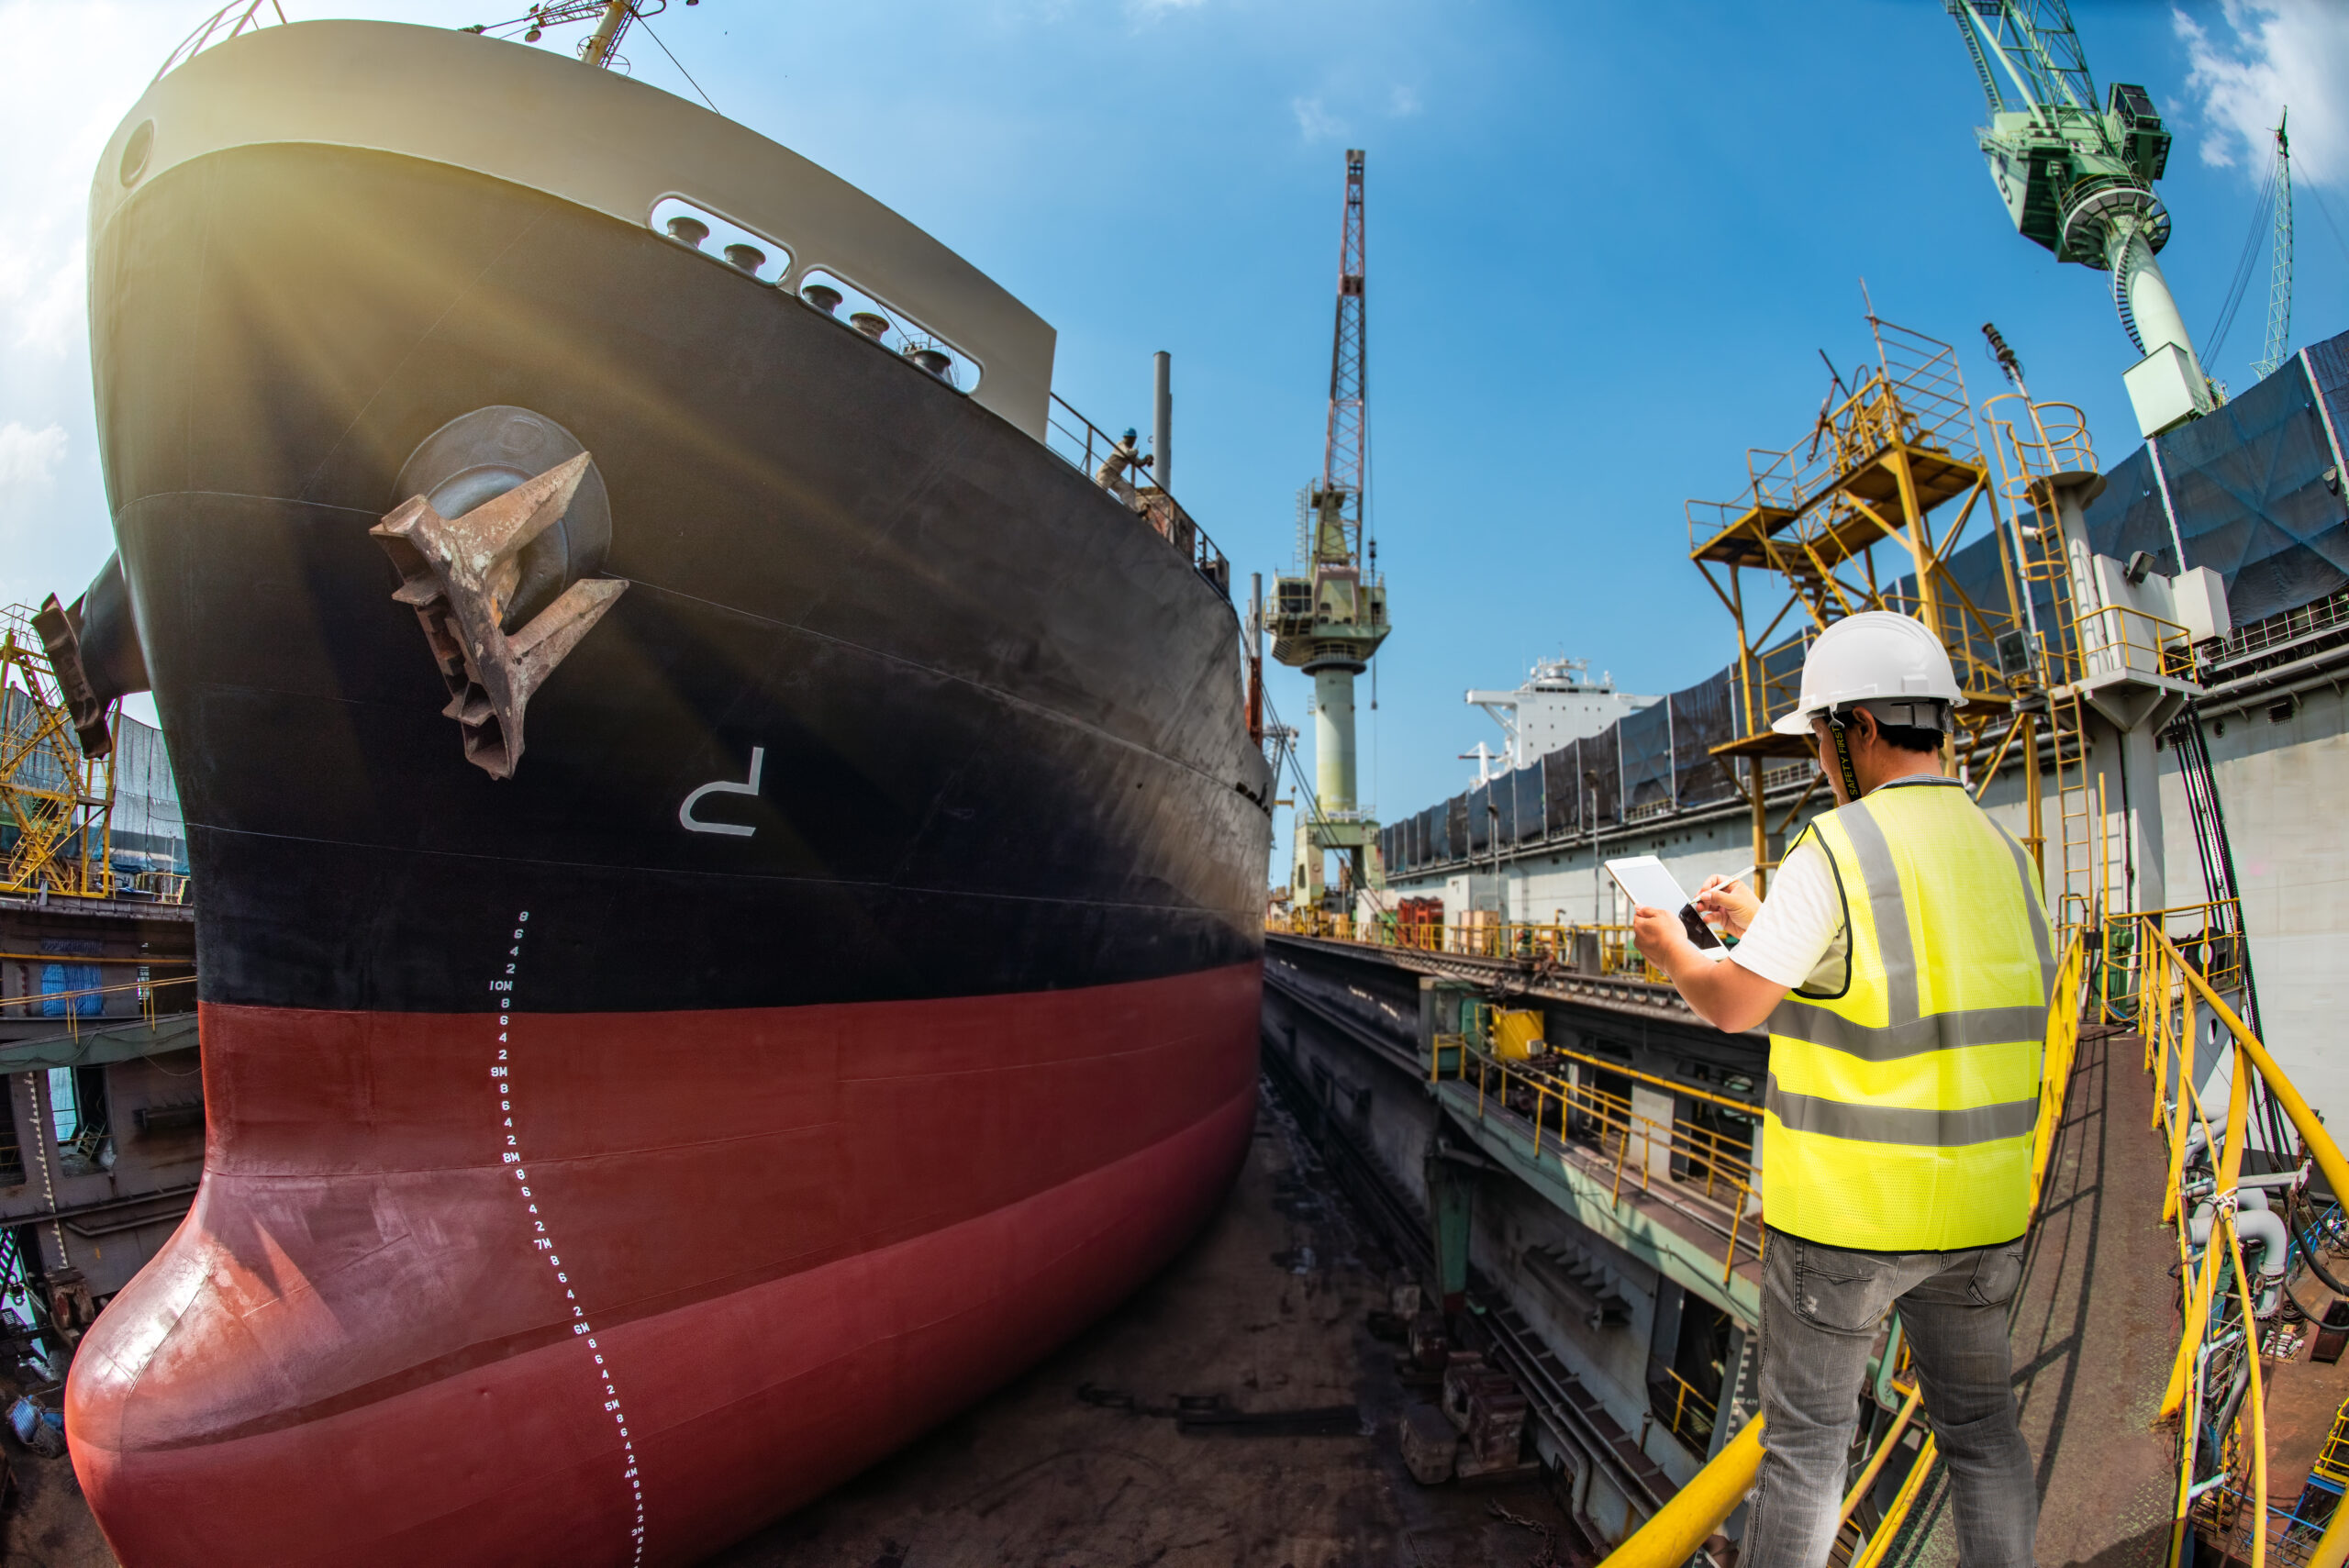 Stevedore, port controller, Port Master, surveyor inspect the bulk head of commercial cargo ship in floating dry dock yard, recondition of overhaul repairing and repainting, working in dry dock yard